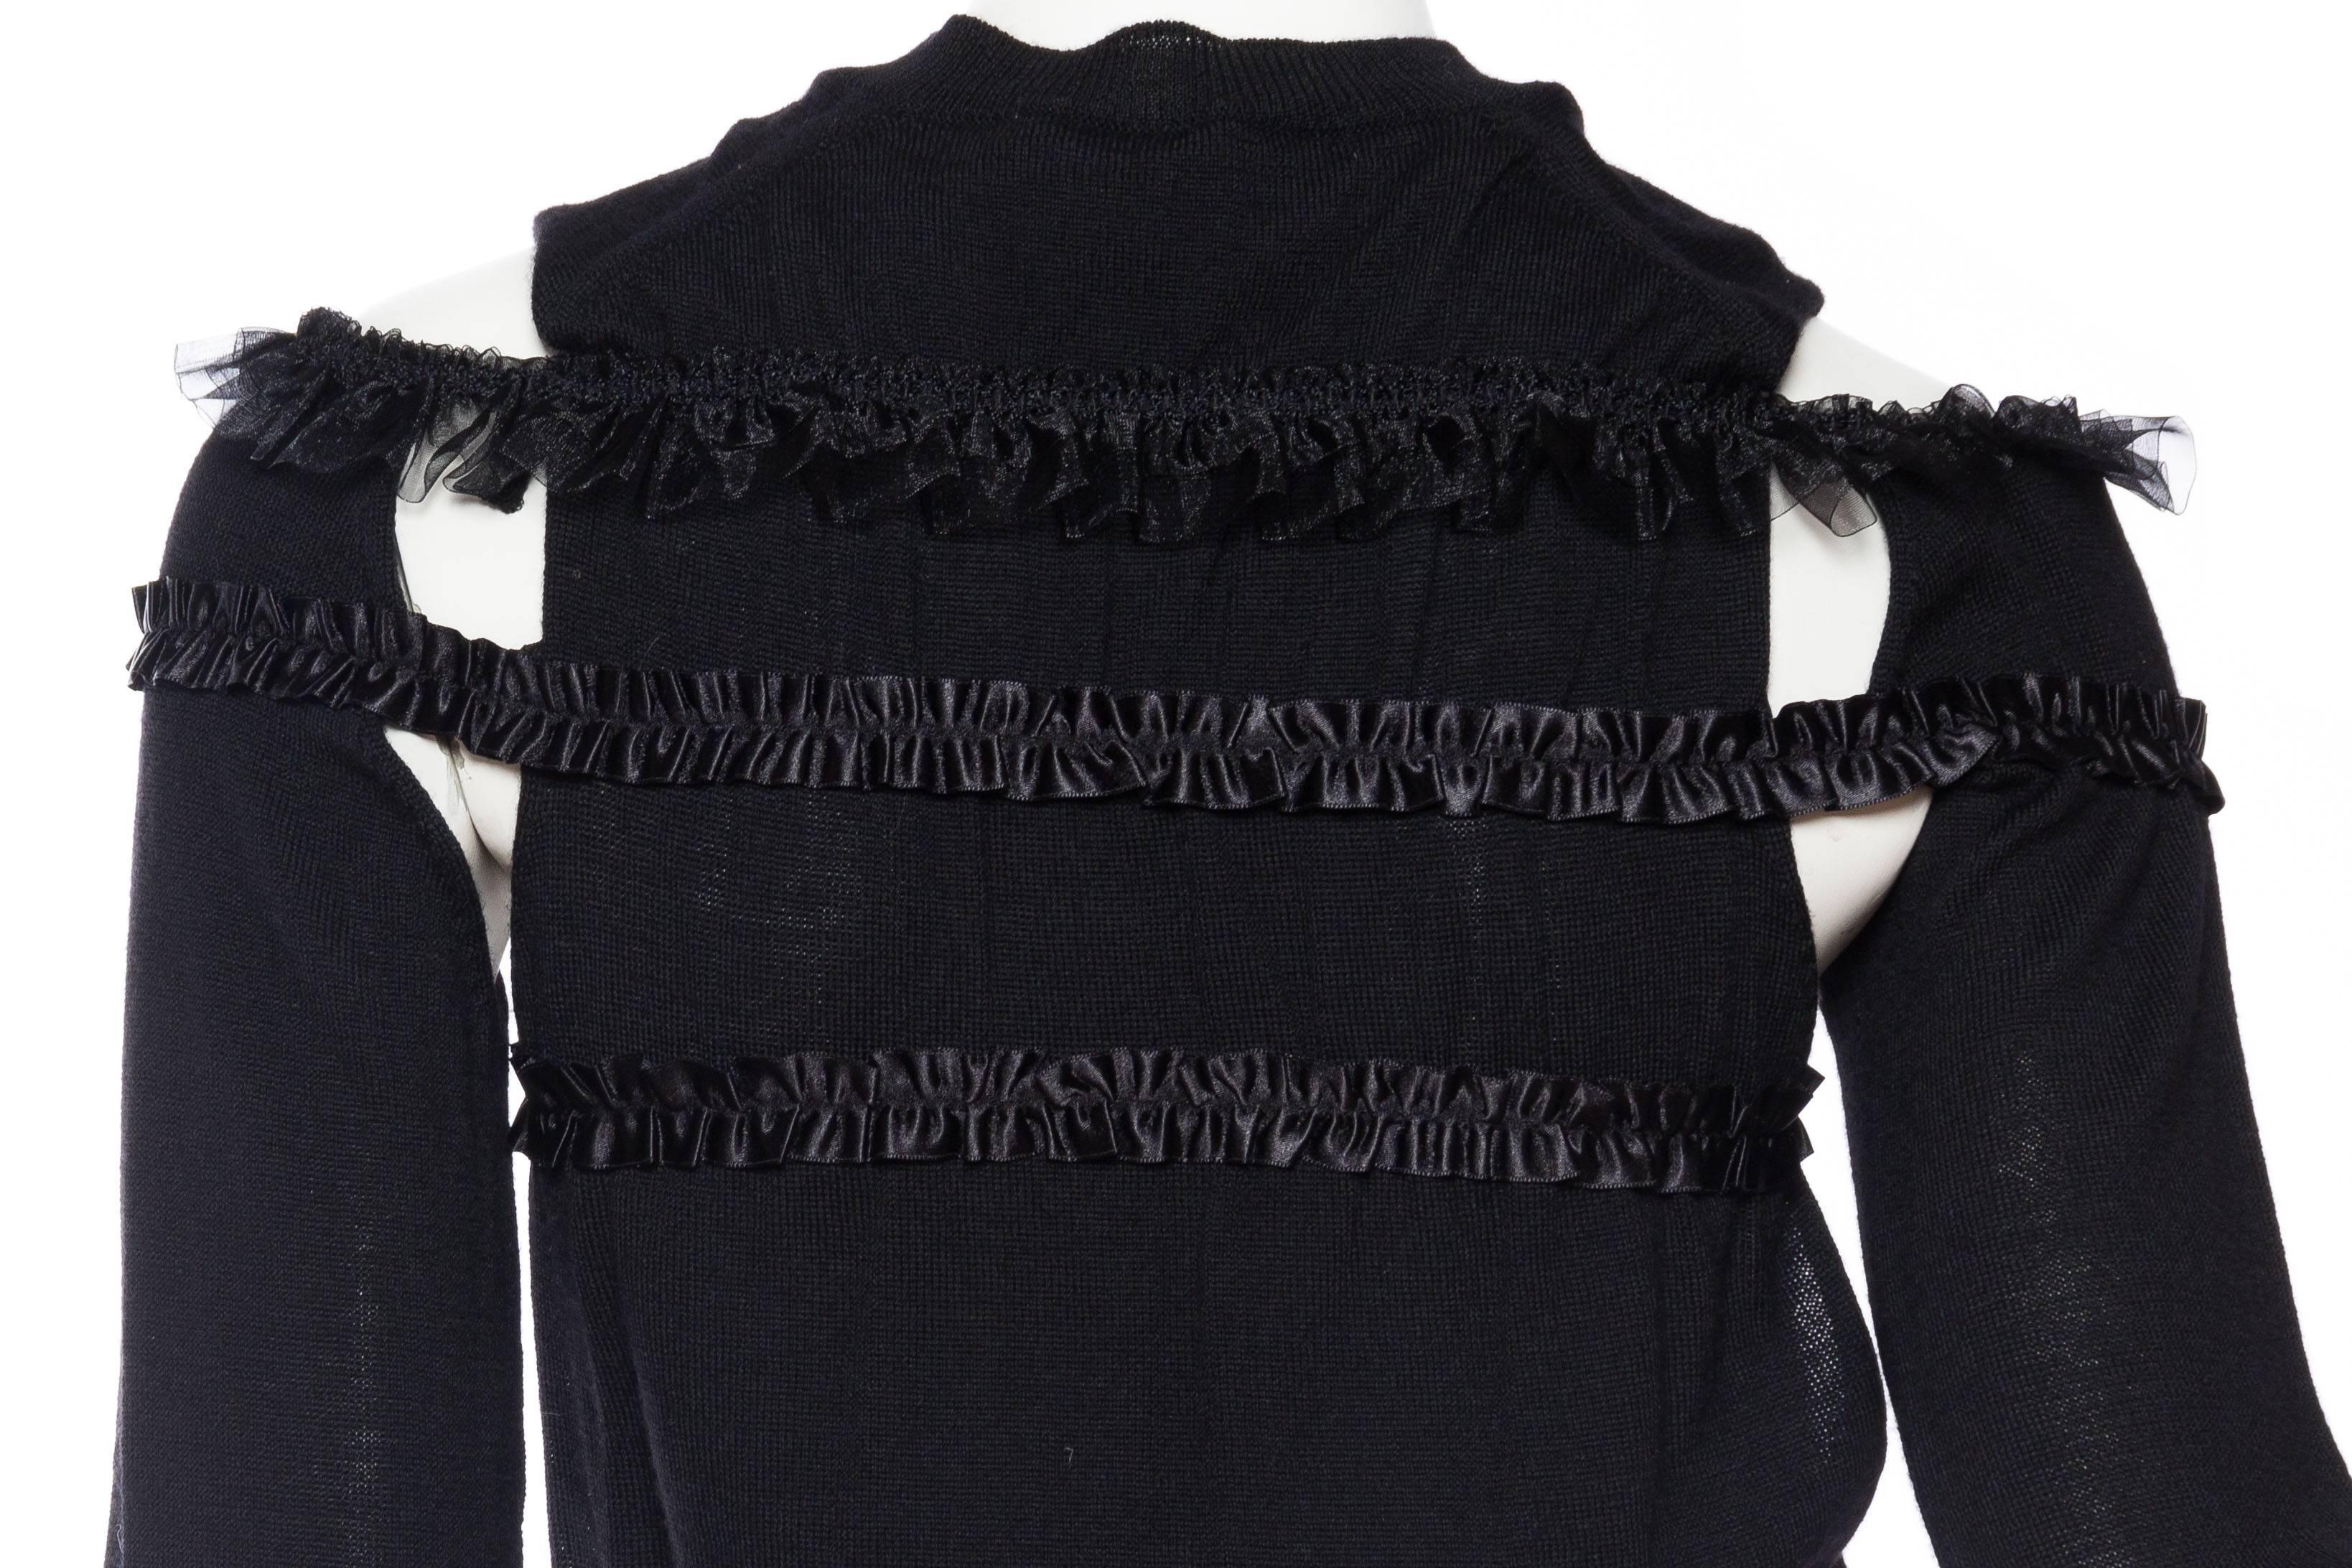 2000S COMME DES GARCONS Black Wool Deconstructed Ruffle Sweater Circa 2008 For Sale 4